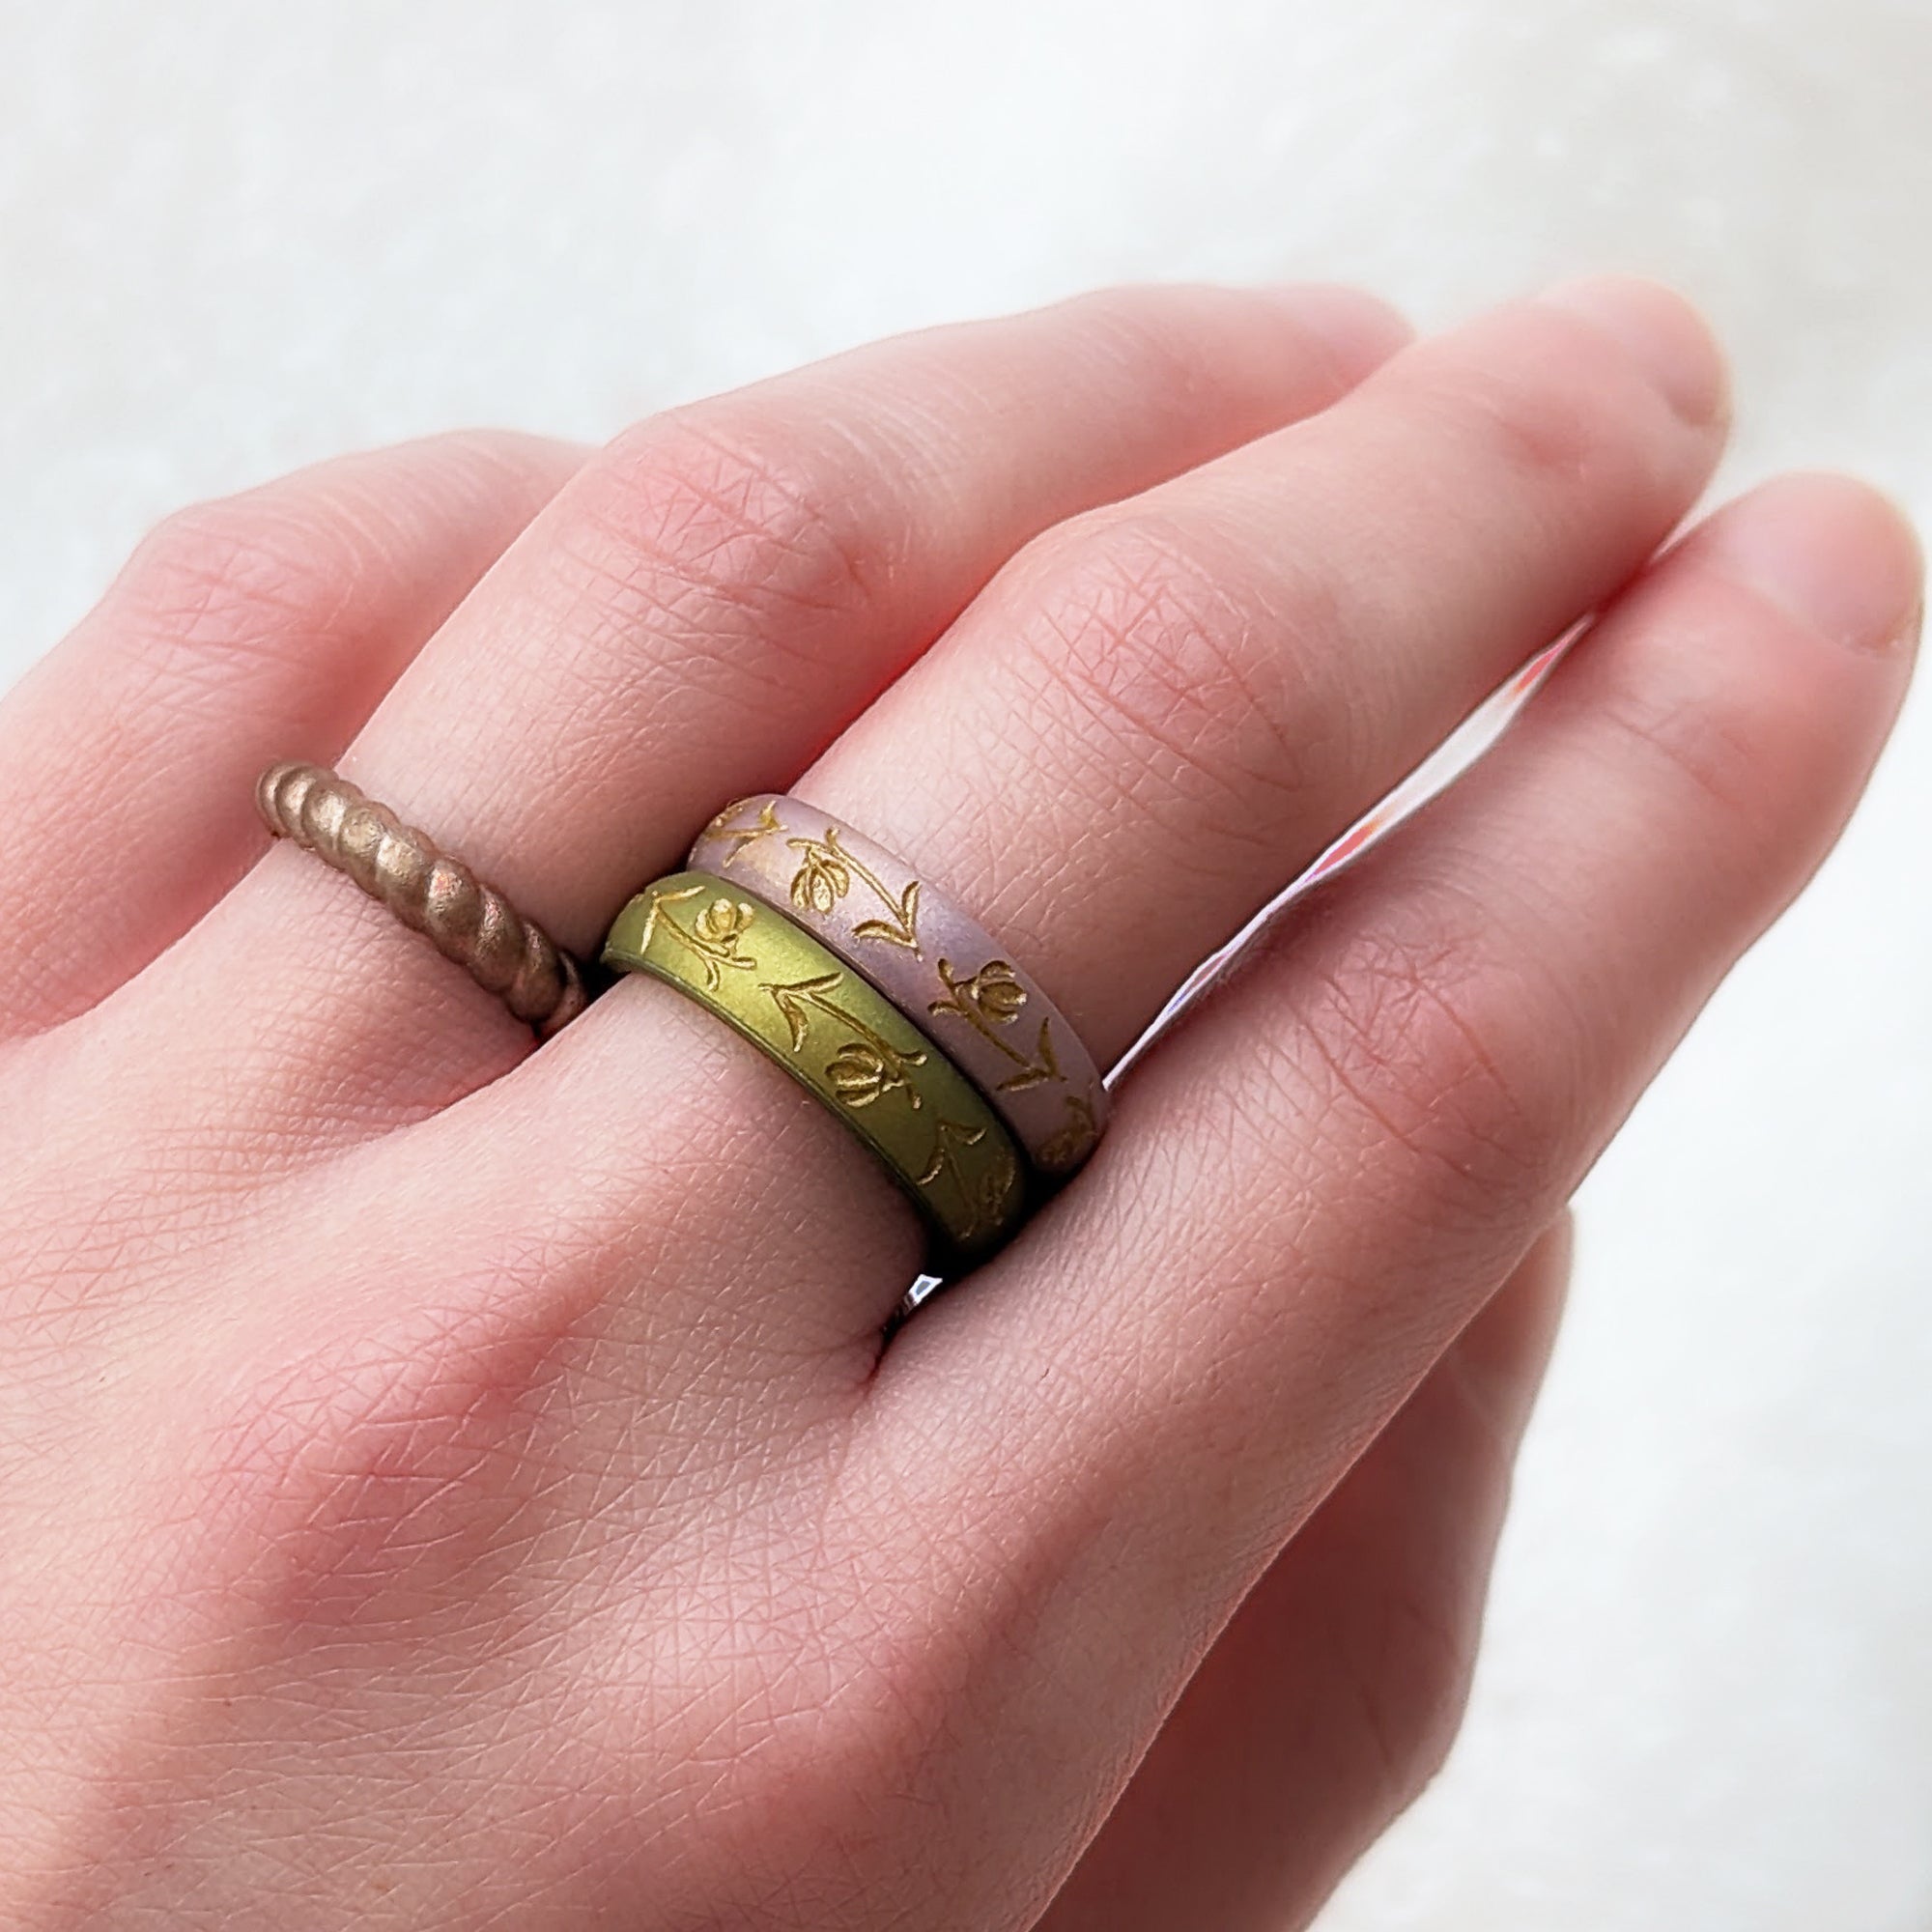 Snowdrop Silicone Ring, January Birth Flower, Engraved with Gold Inlay